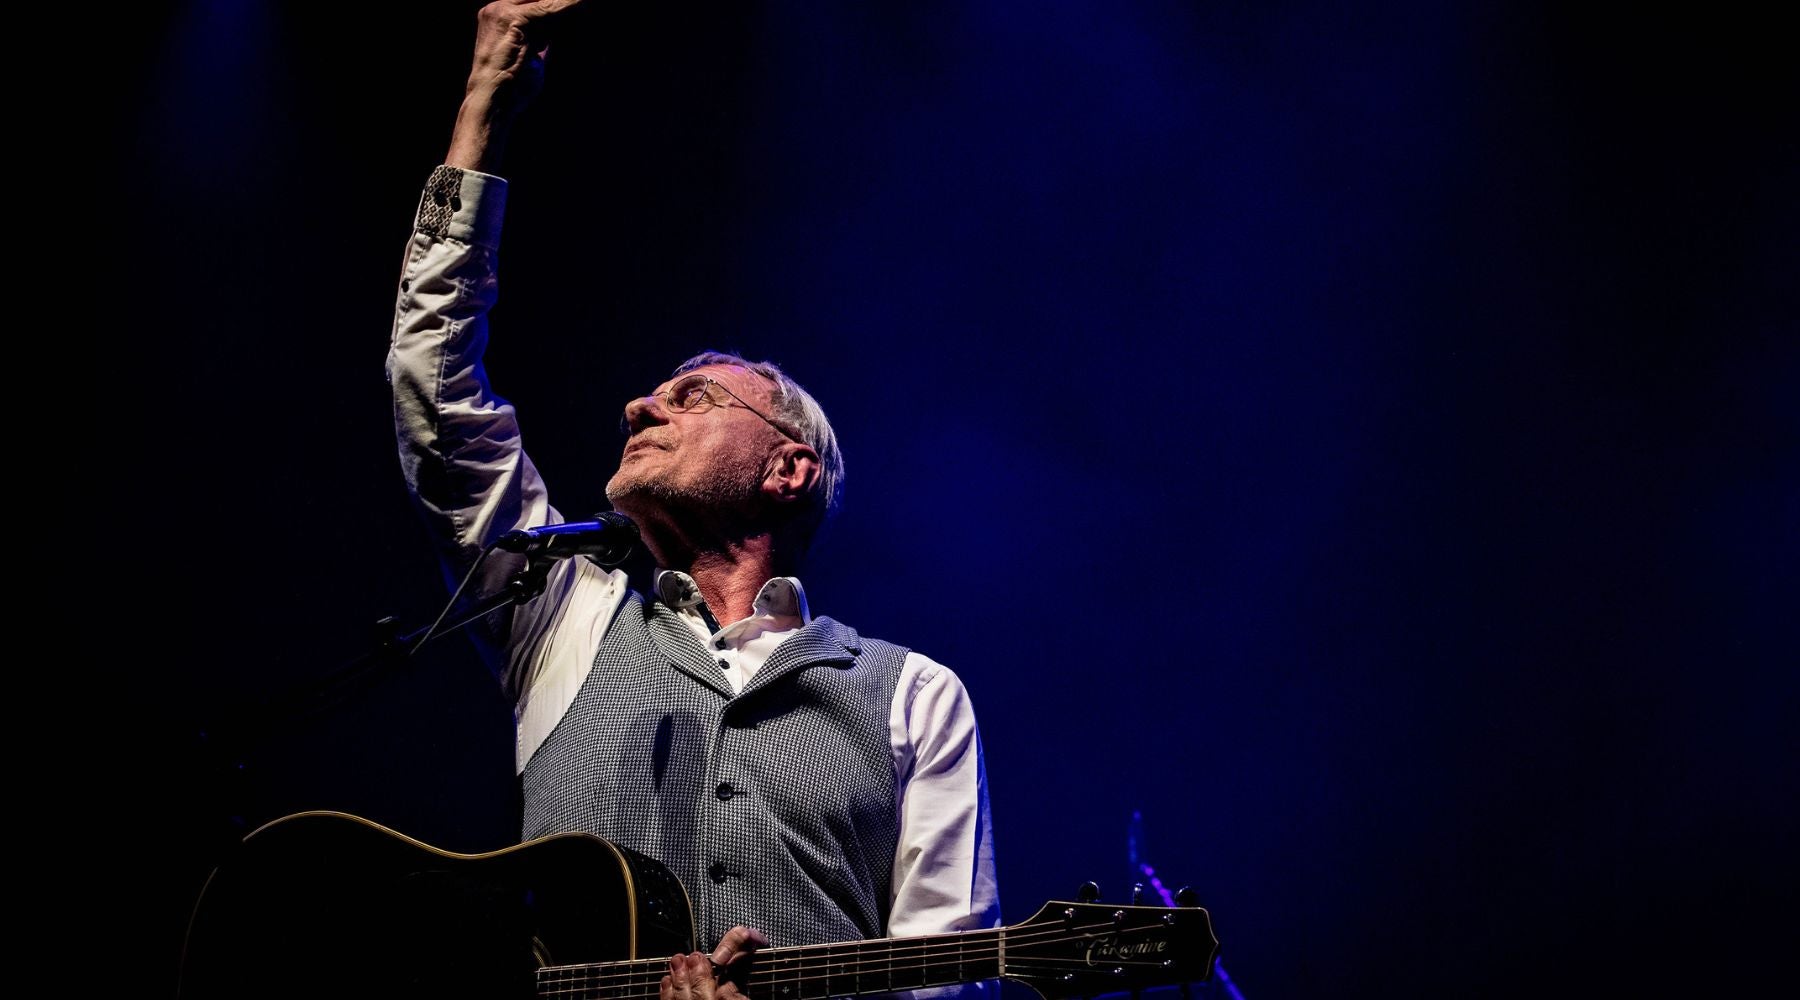 Steve Harley – Come Up And See Me…And Other Stories at Scarborough Spa Theatre, Scarborough